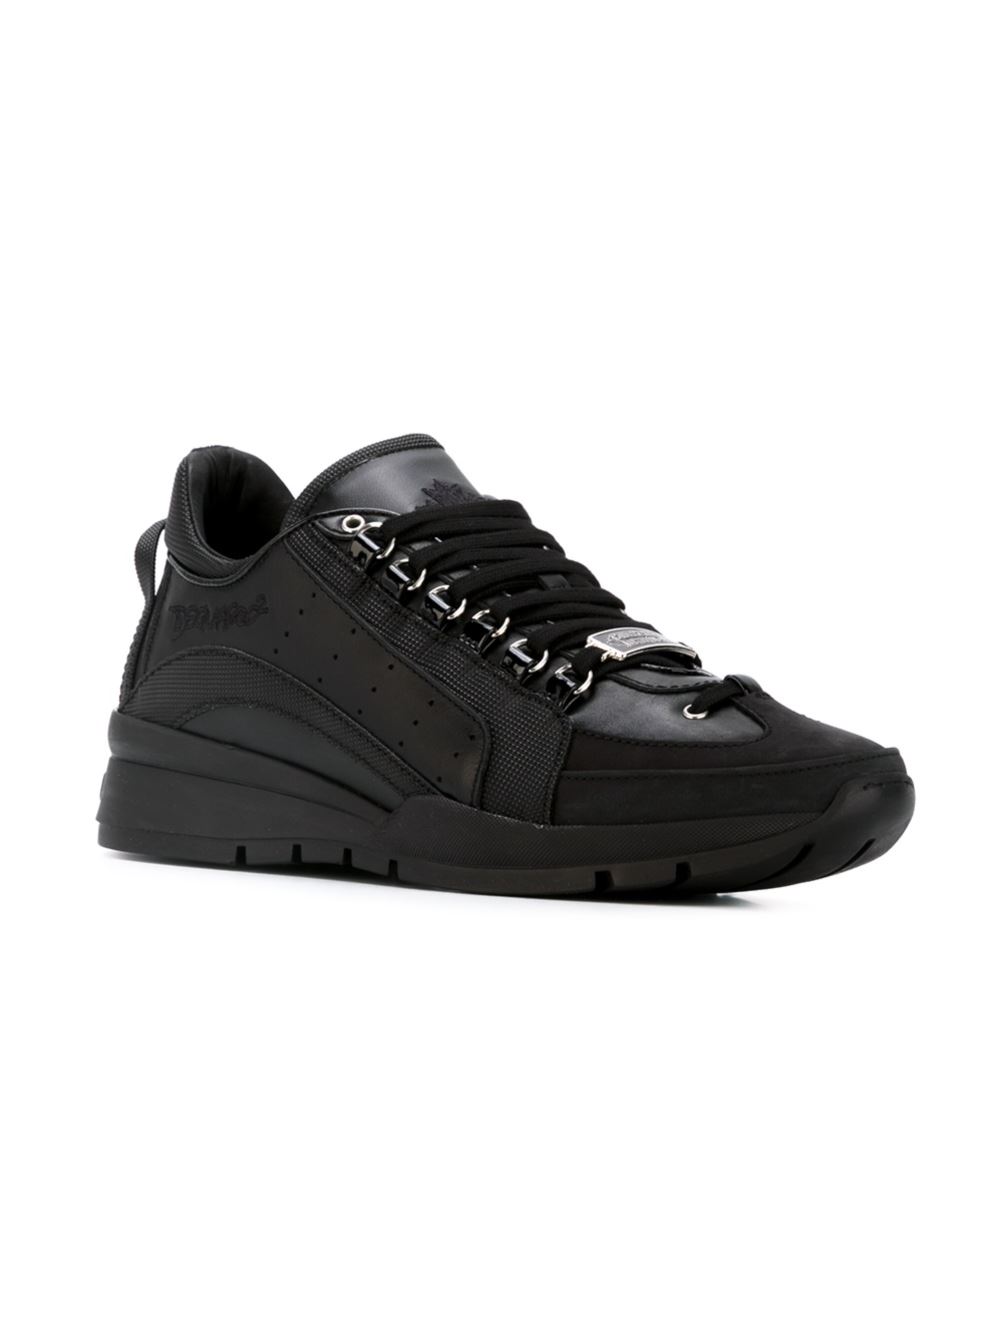 dsquared chaussure homme prix